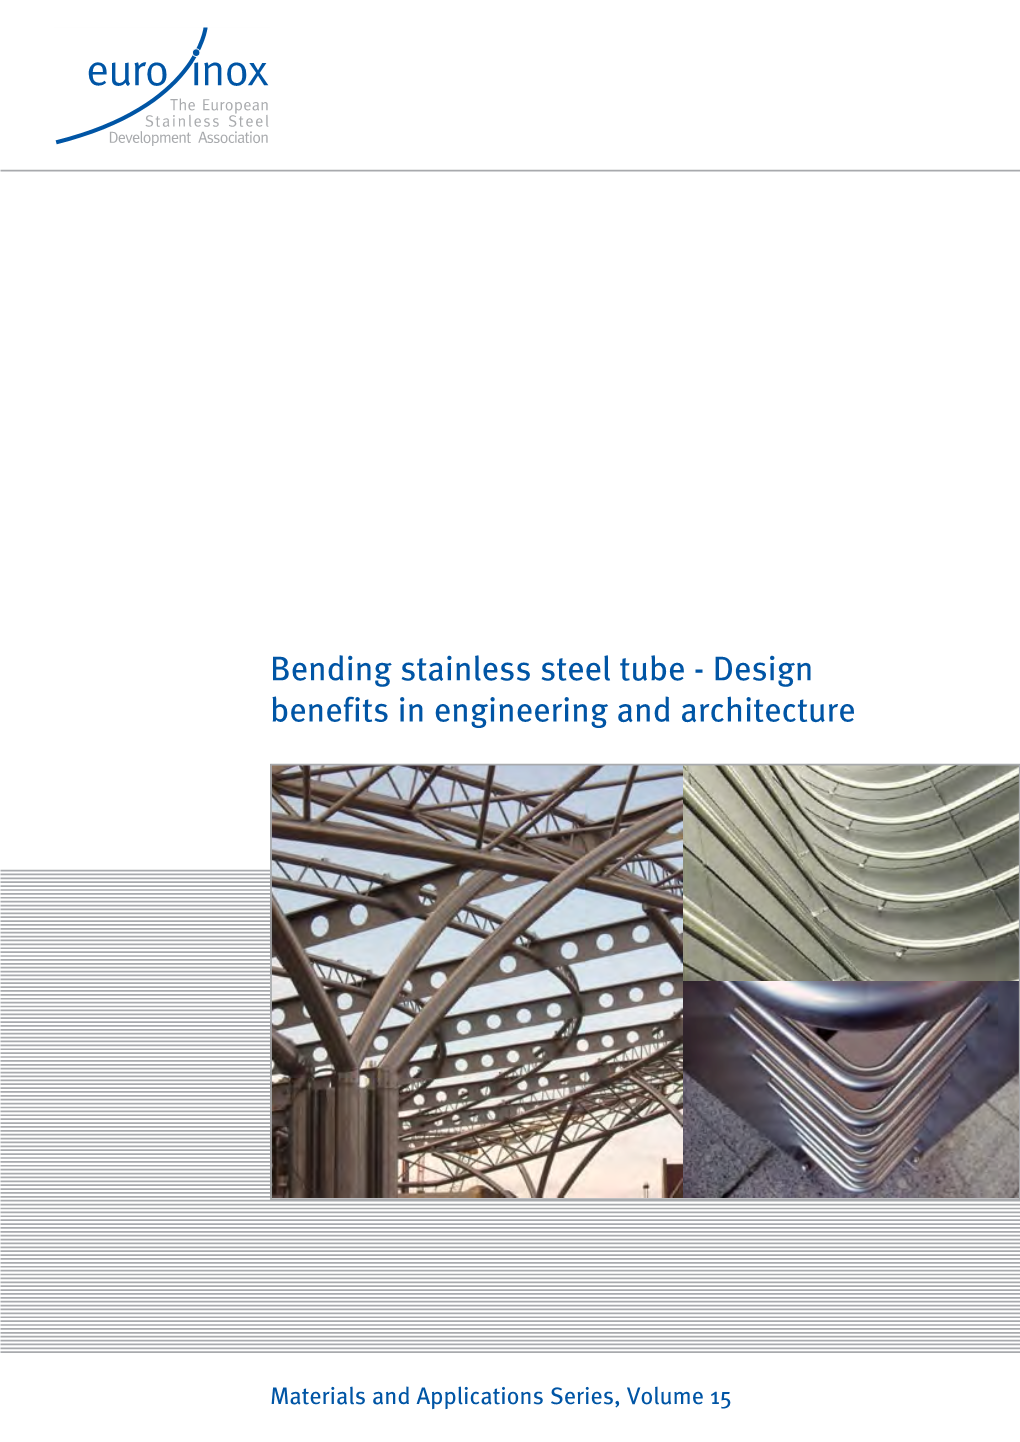 Bending Stainless Steel Tube - Design Benefits in Engineering and Architecture